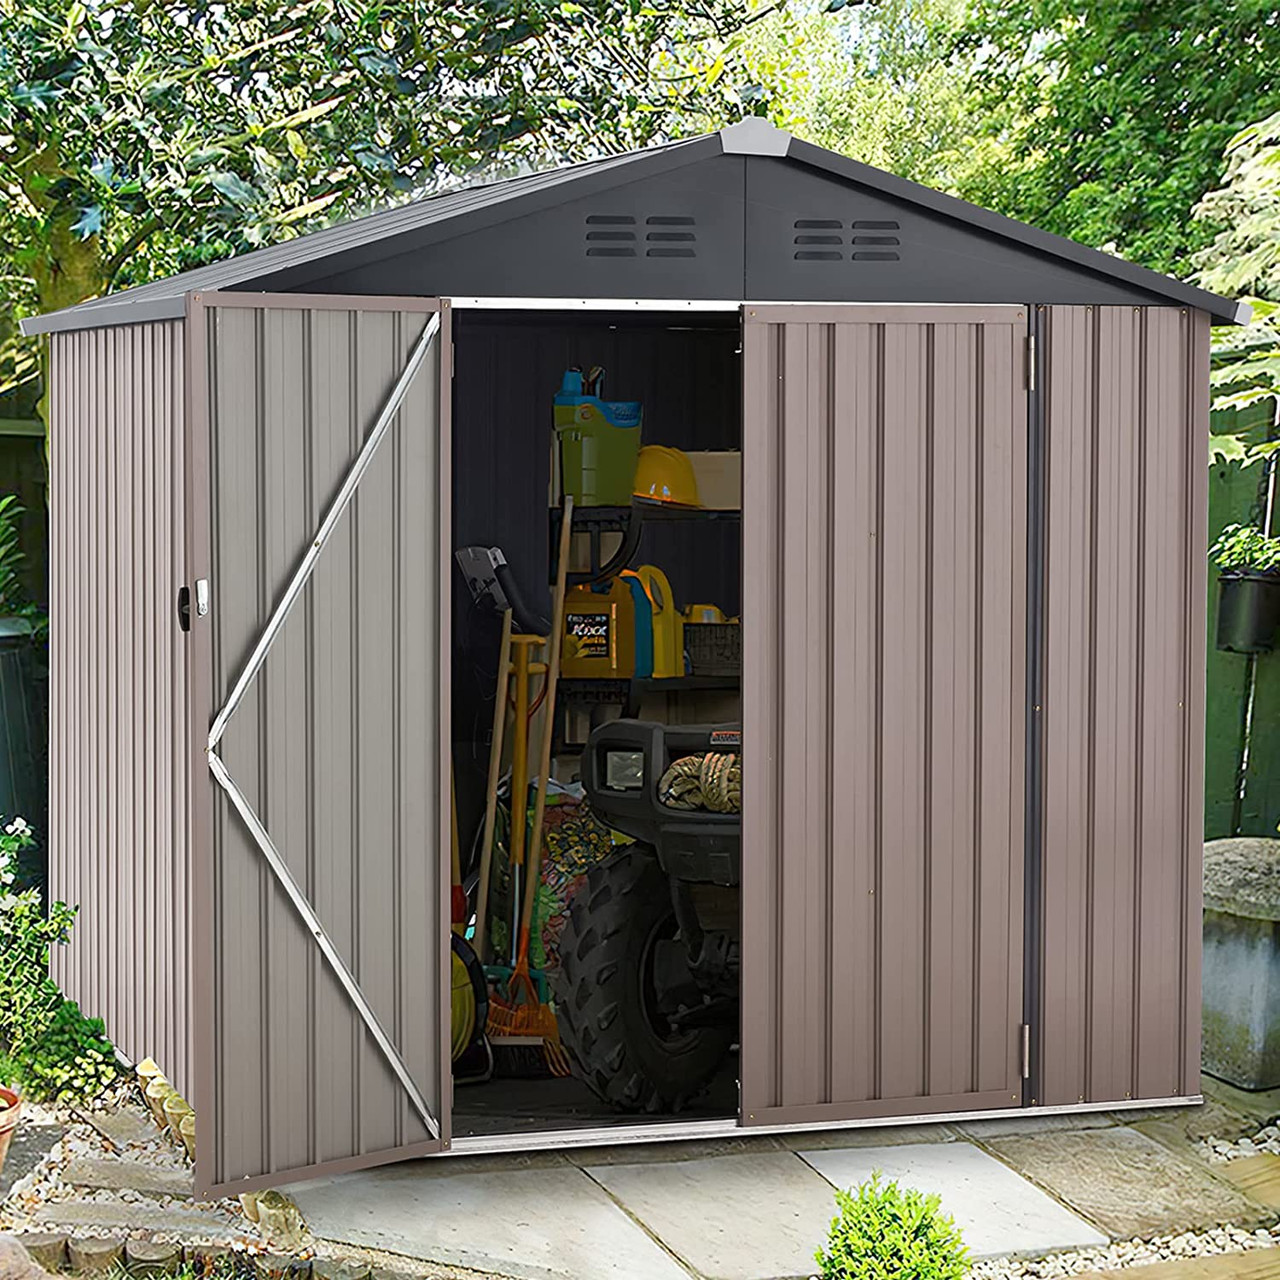 Outdoor Metal Storage Shed (7' x 7' or 10' x 8') product image